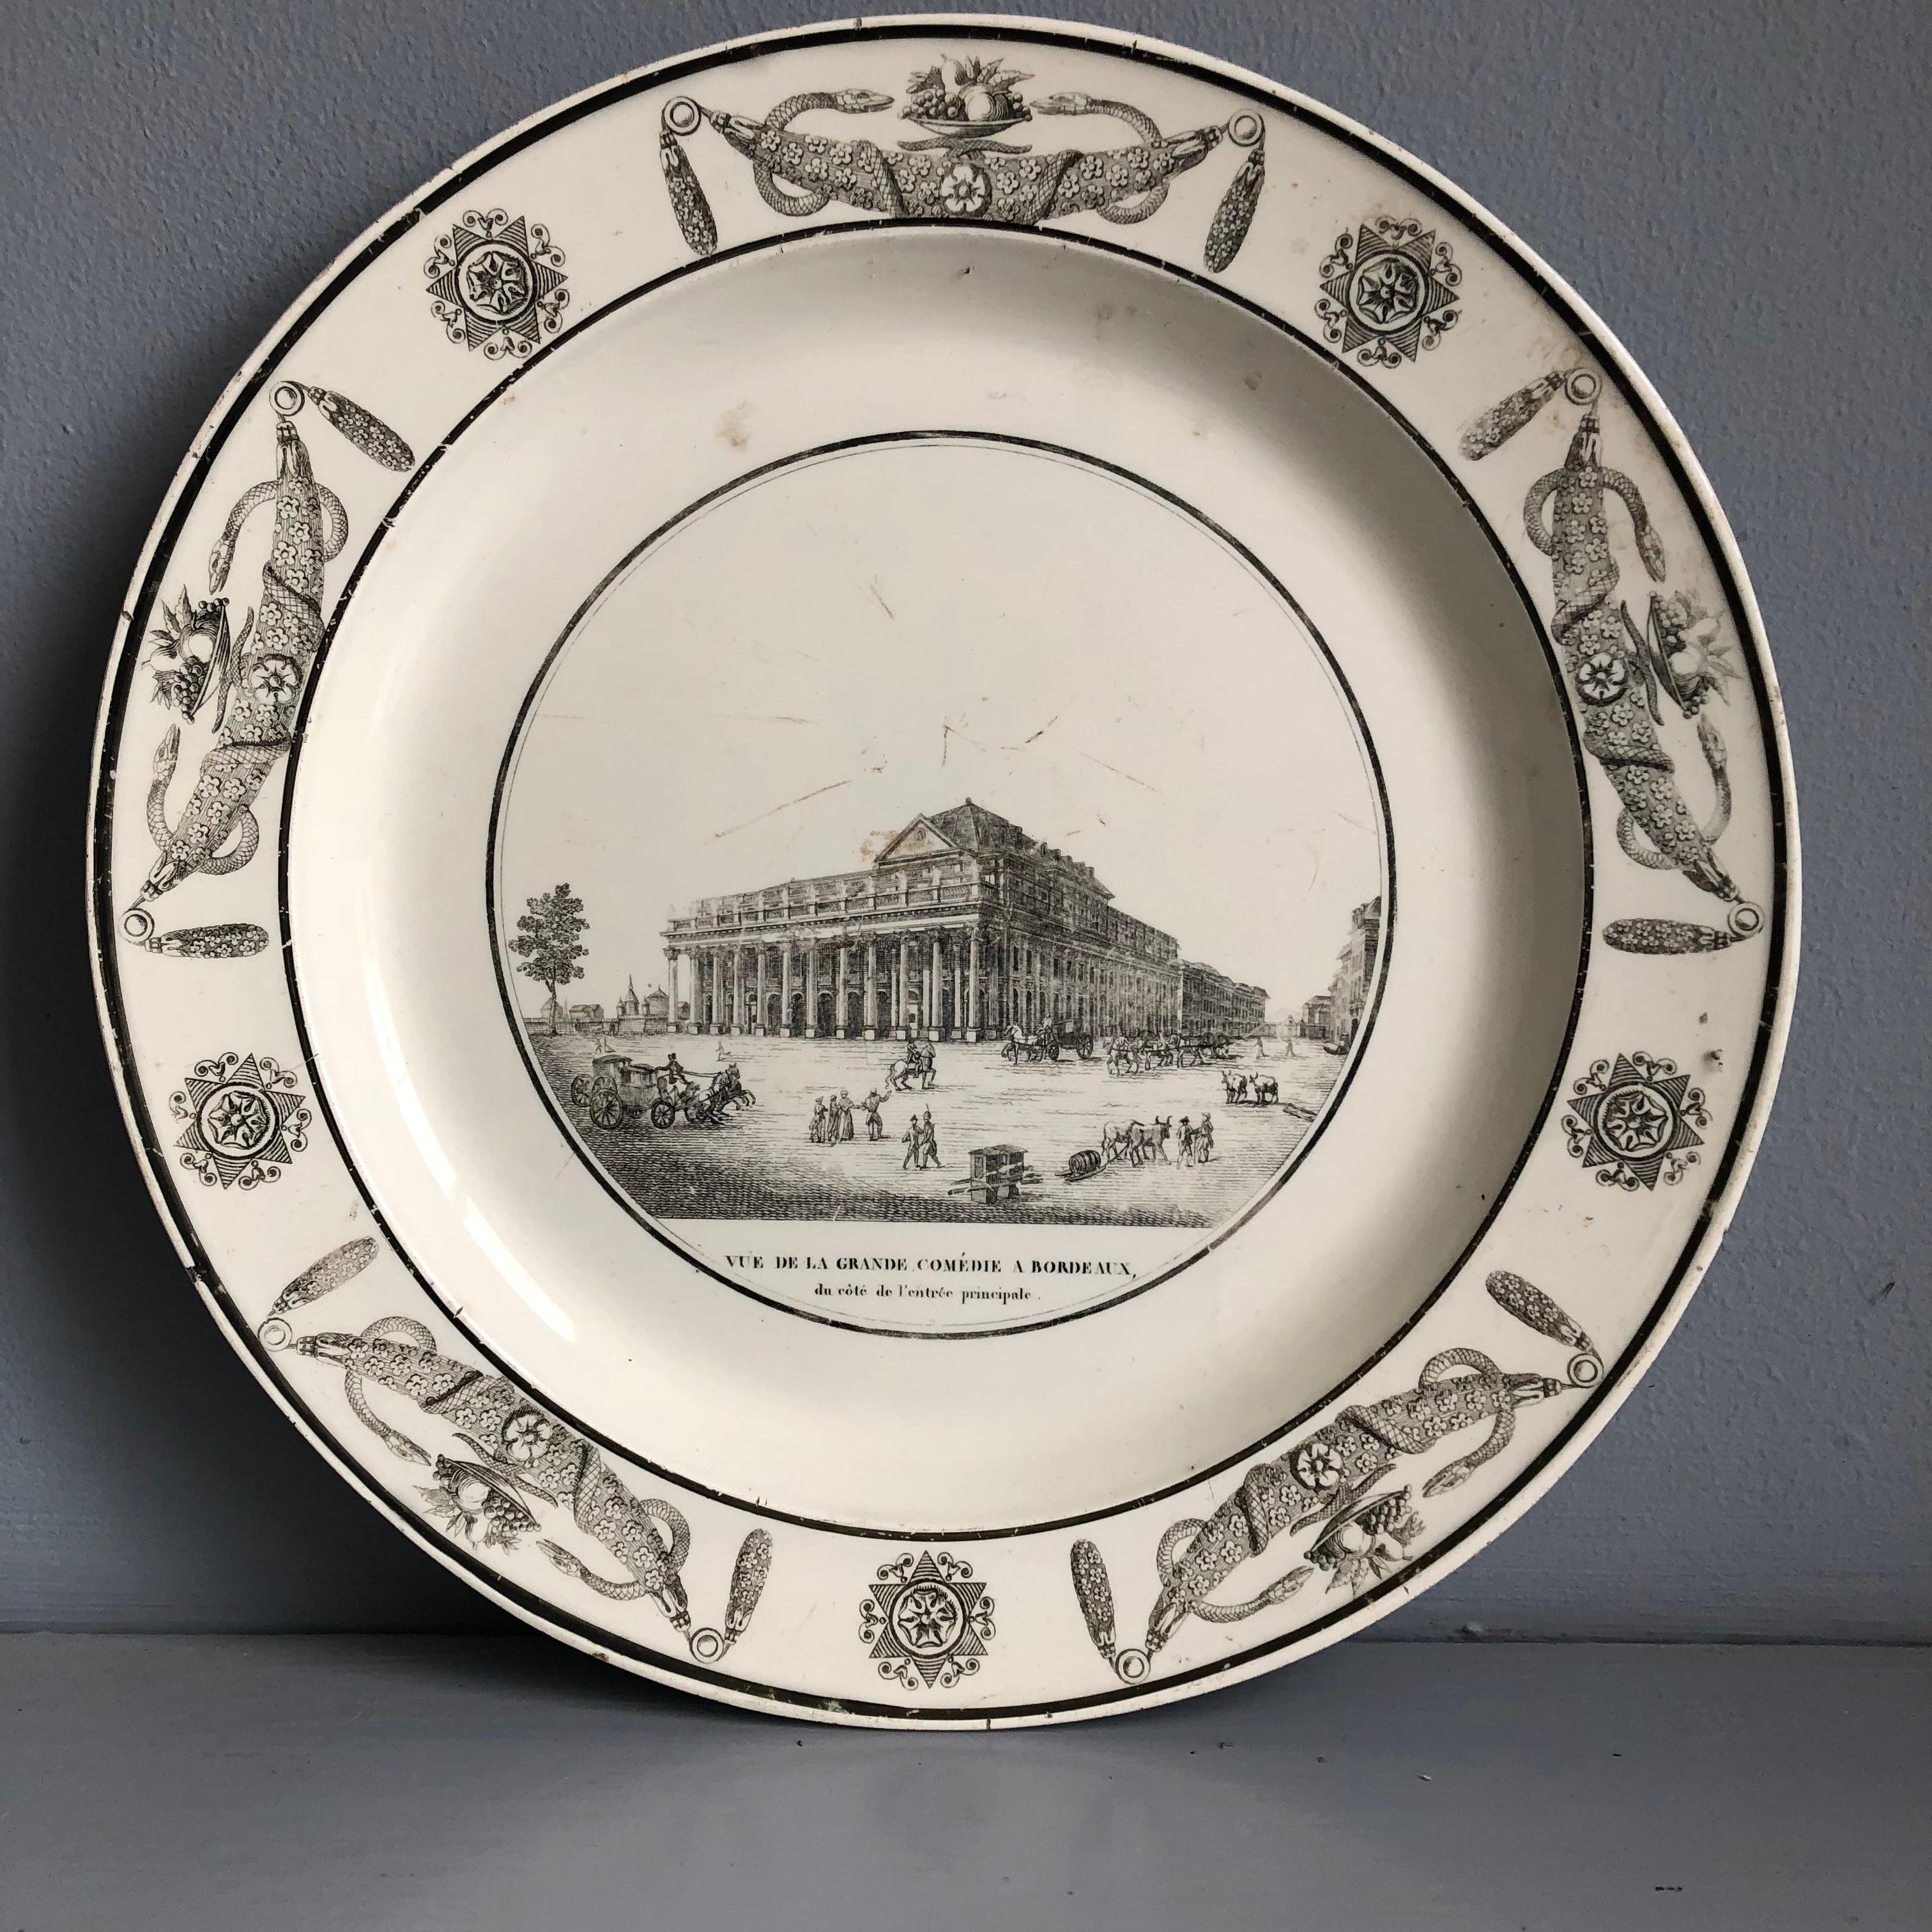 A transferware plate in the manner of Creil et Montereau circa 1820, depicting the Grande Comedie a Bordeaux.